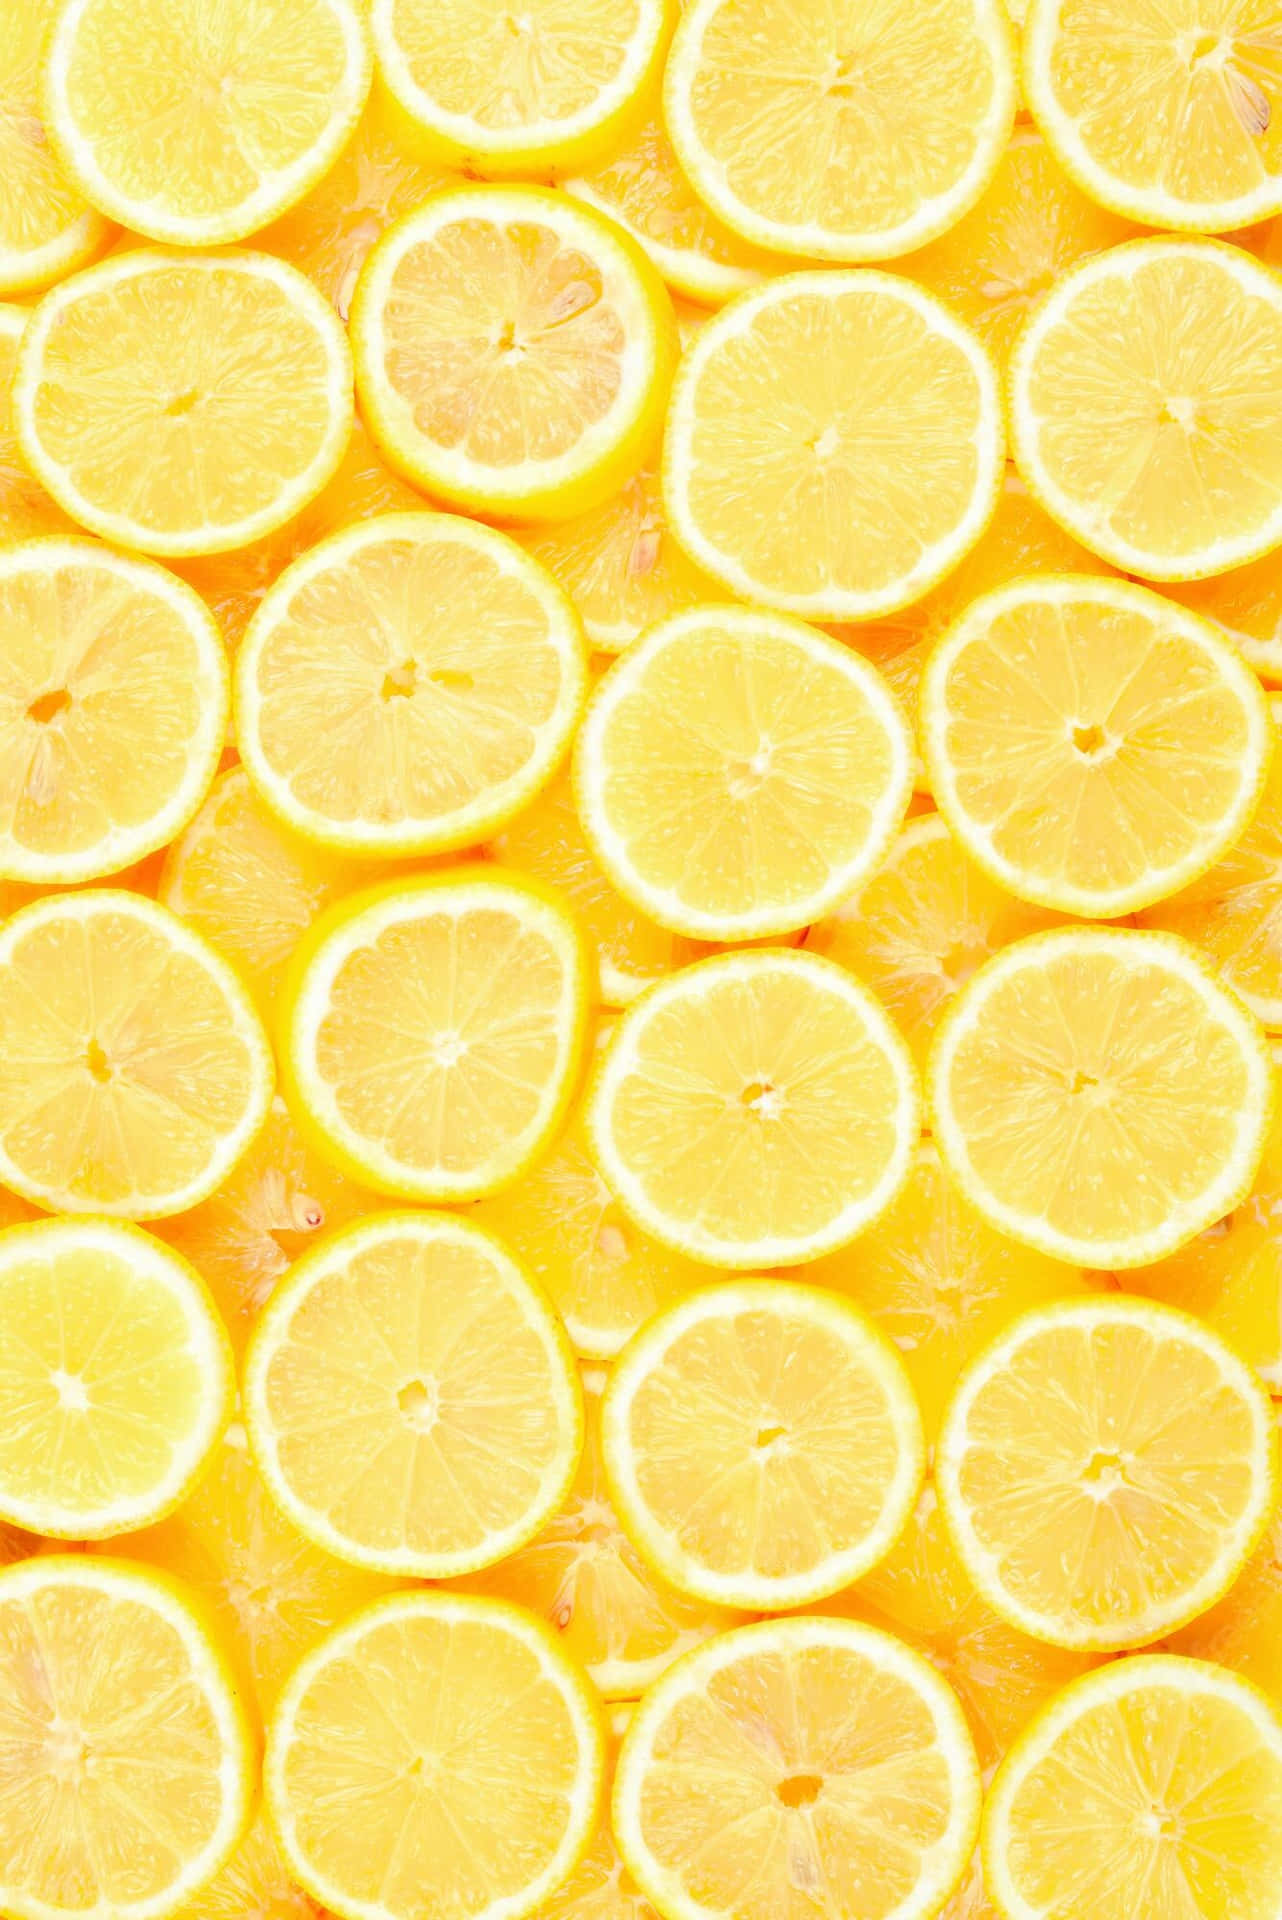 Brighten up your day with a Lemon Iphone Wallpaper